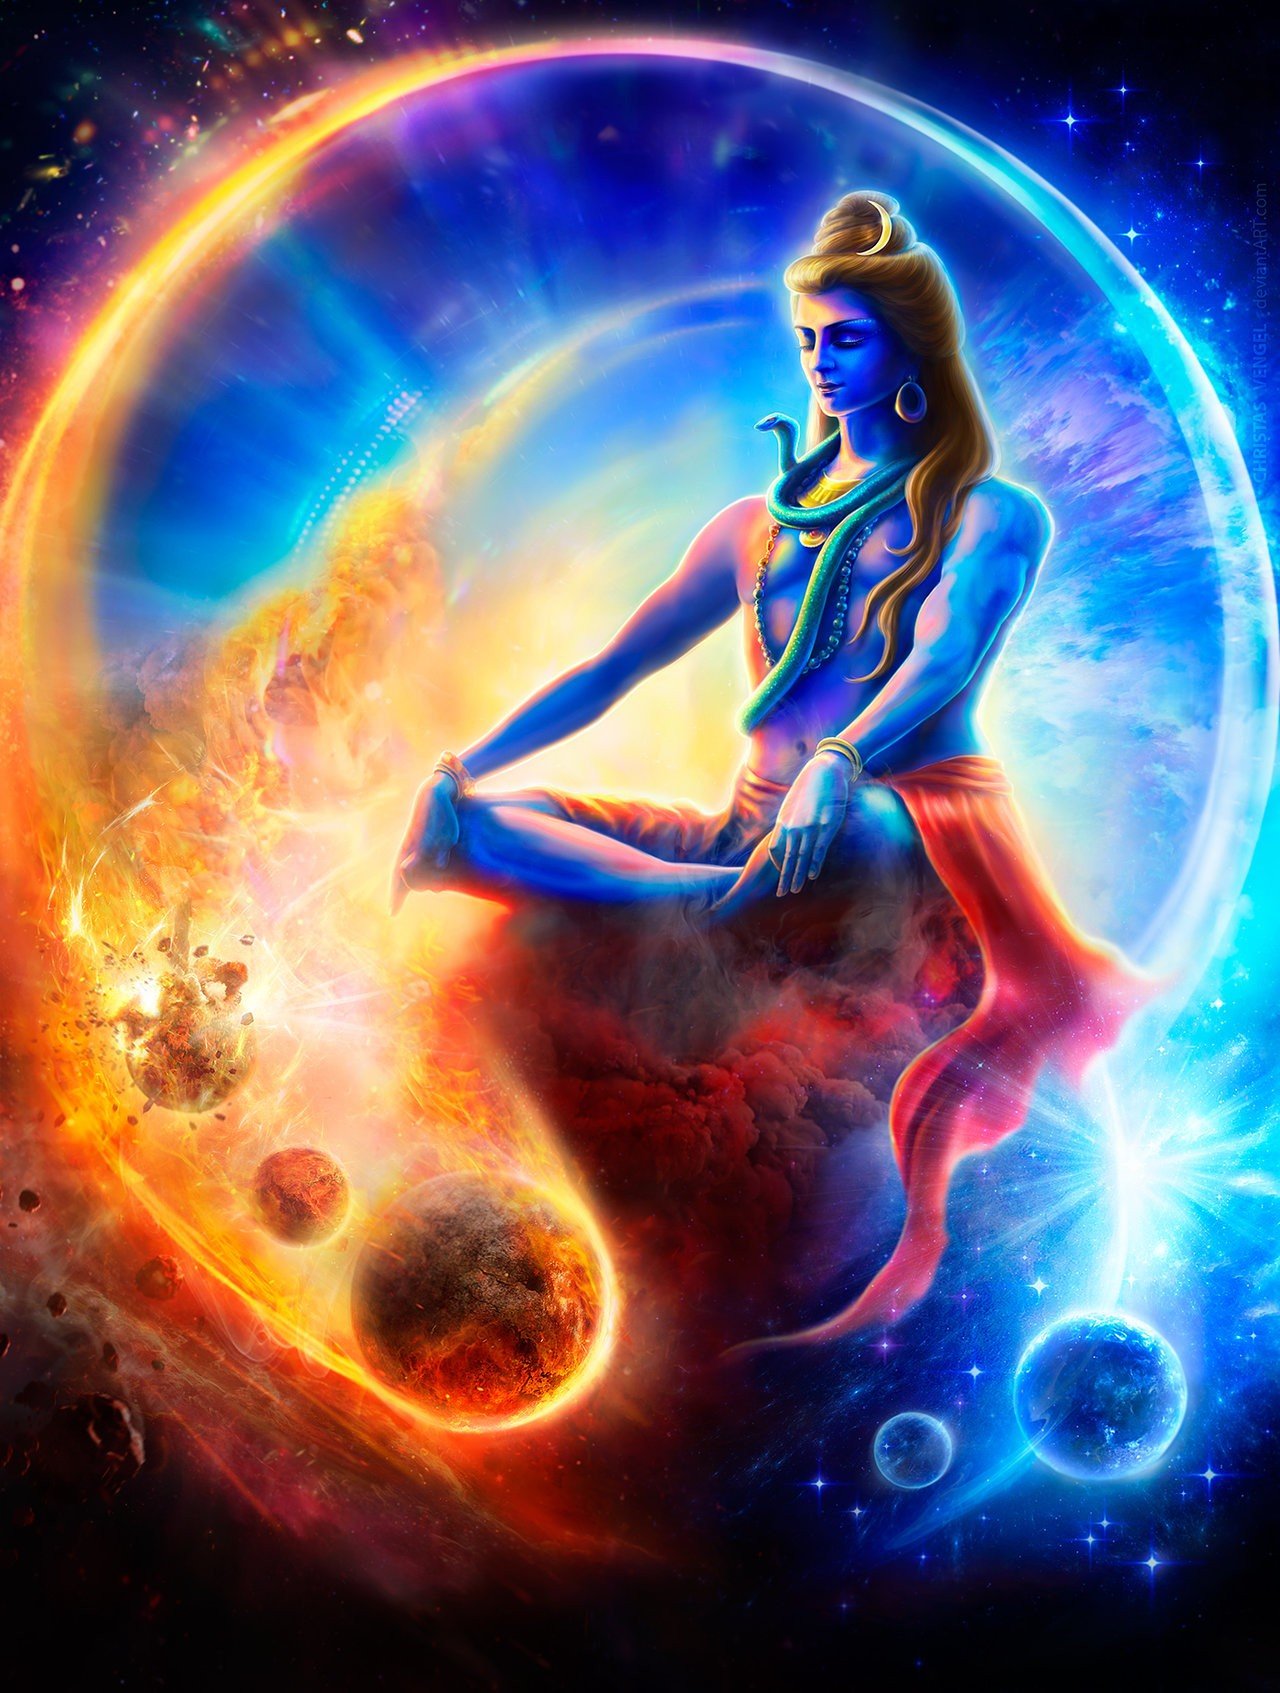 Lord Shiva Art Wallpapers - Wallpaper Cave